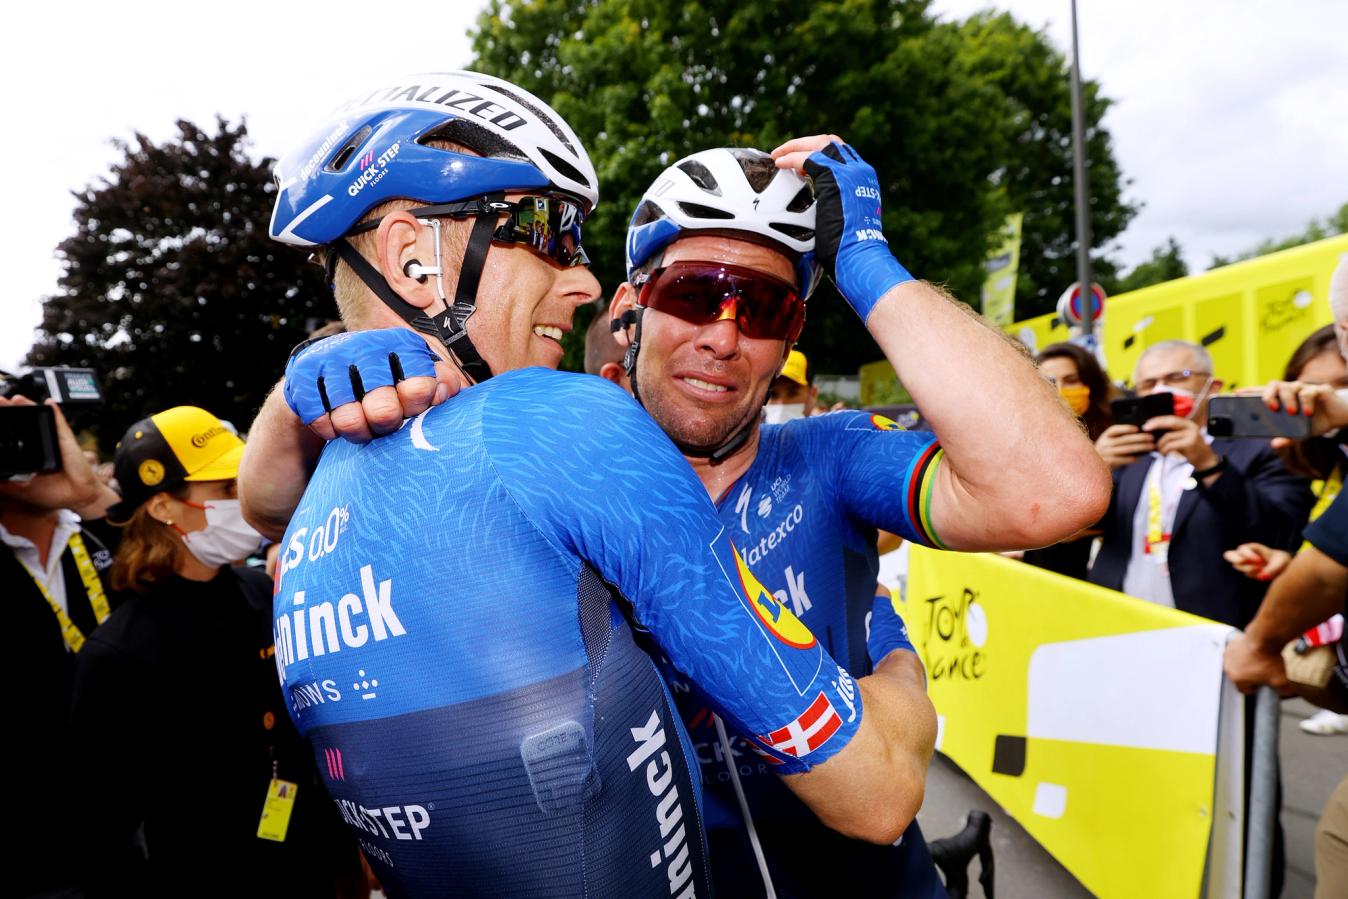 Mark Cavendish can scarcely believe it as he hugs Michael Mørkøv at the 2021 Tour de France. The Manxman has just won his first Tour stage in five years